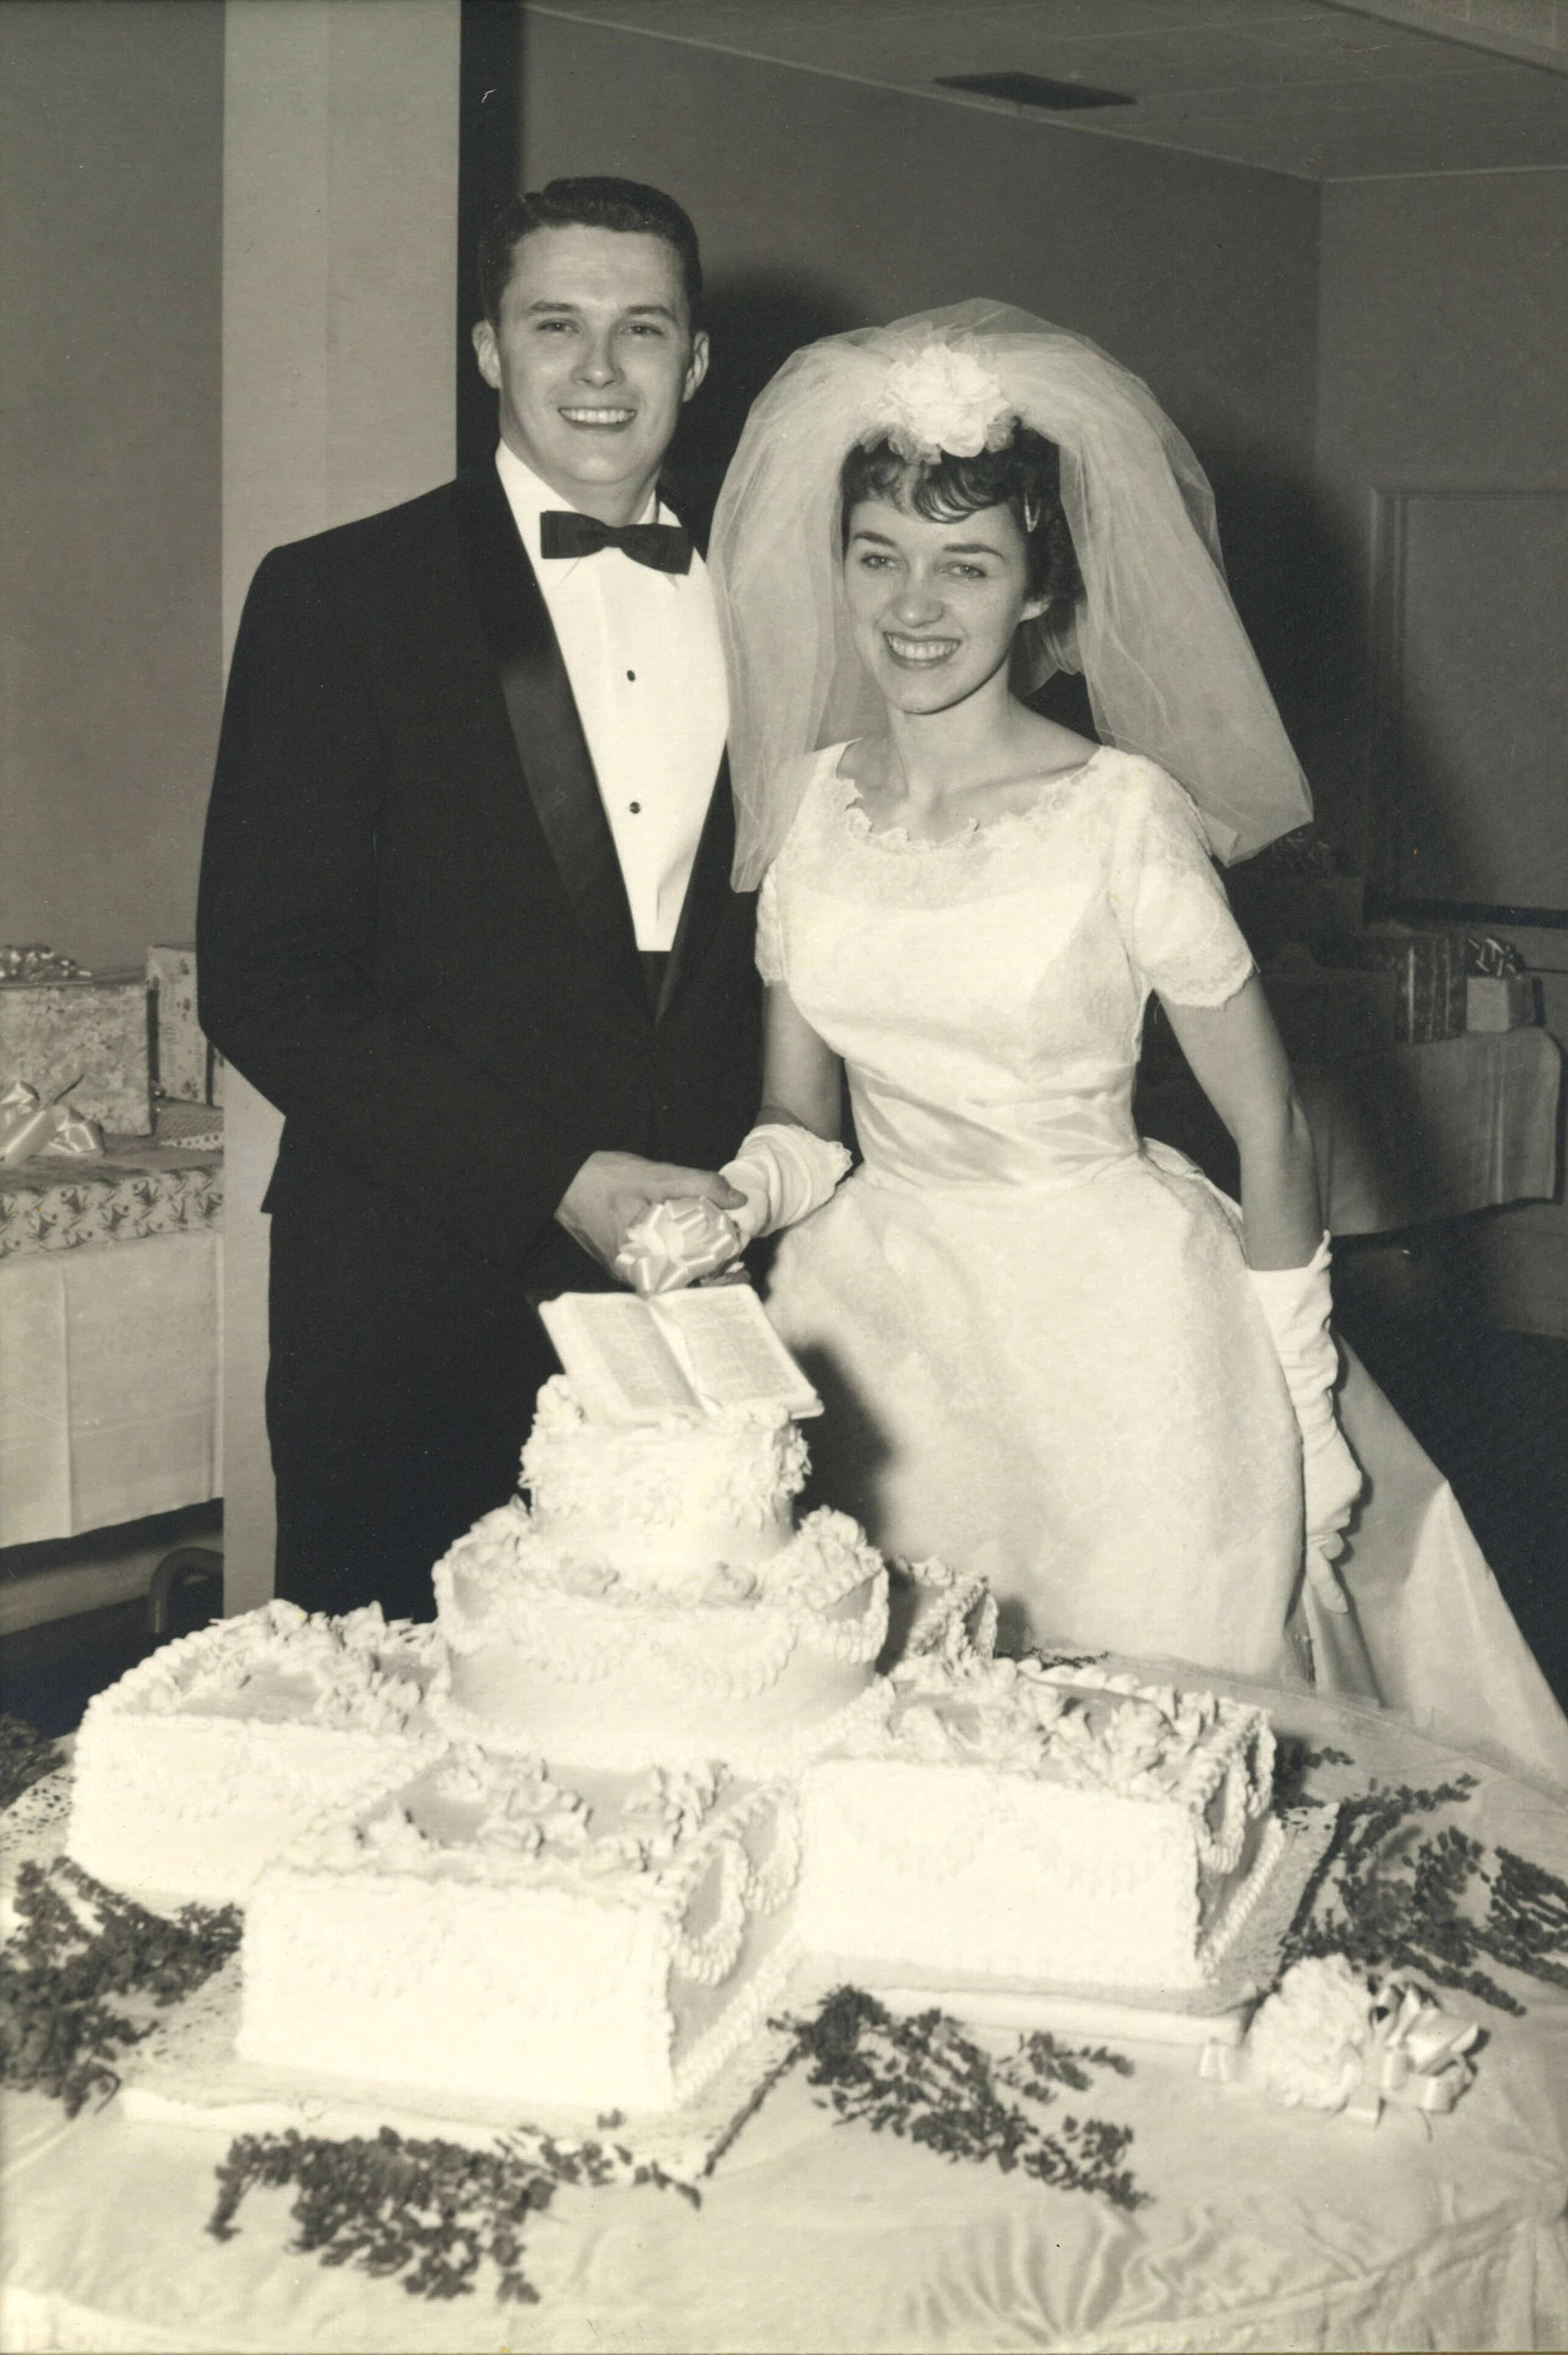 Gary and Tonette Snyder on their wedding day. They were married for 57 years and had three sons — Quin, Matt and Nate. Photo courtesy of Matt Snyder